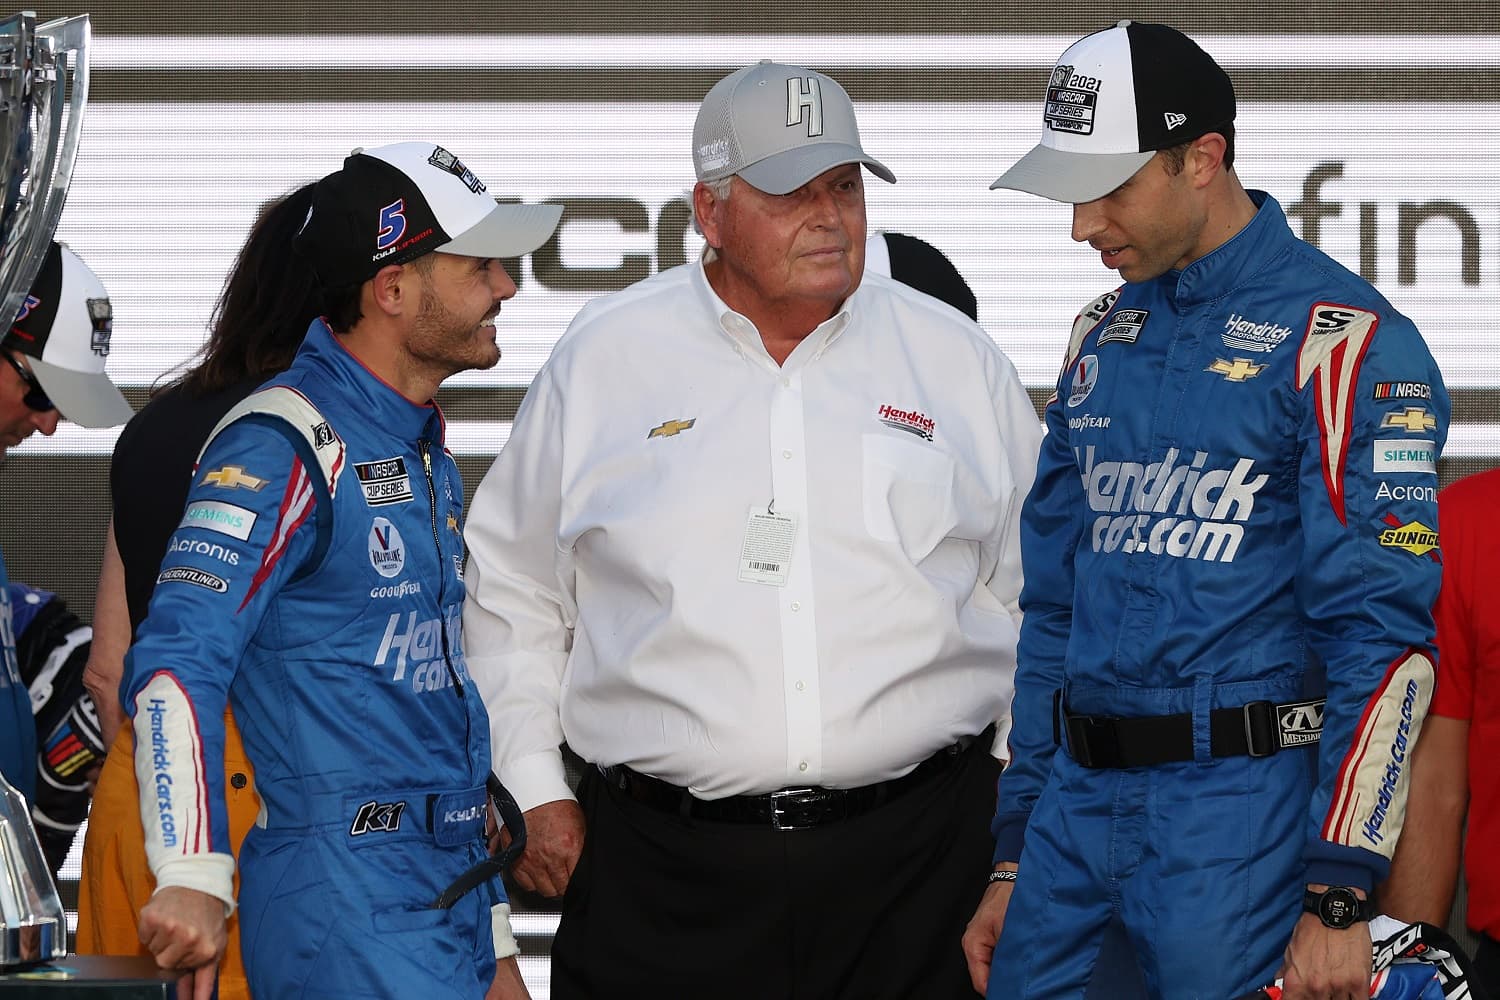 Kyle Larson, Rick Hendrick, an Cliff Daniels talk in victory lane after winning the NASCAR Cup Series Championship at Phoenix Raceway on Nov. 7, 2021. | Christian Petersen/Getty Images